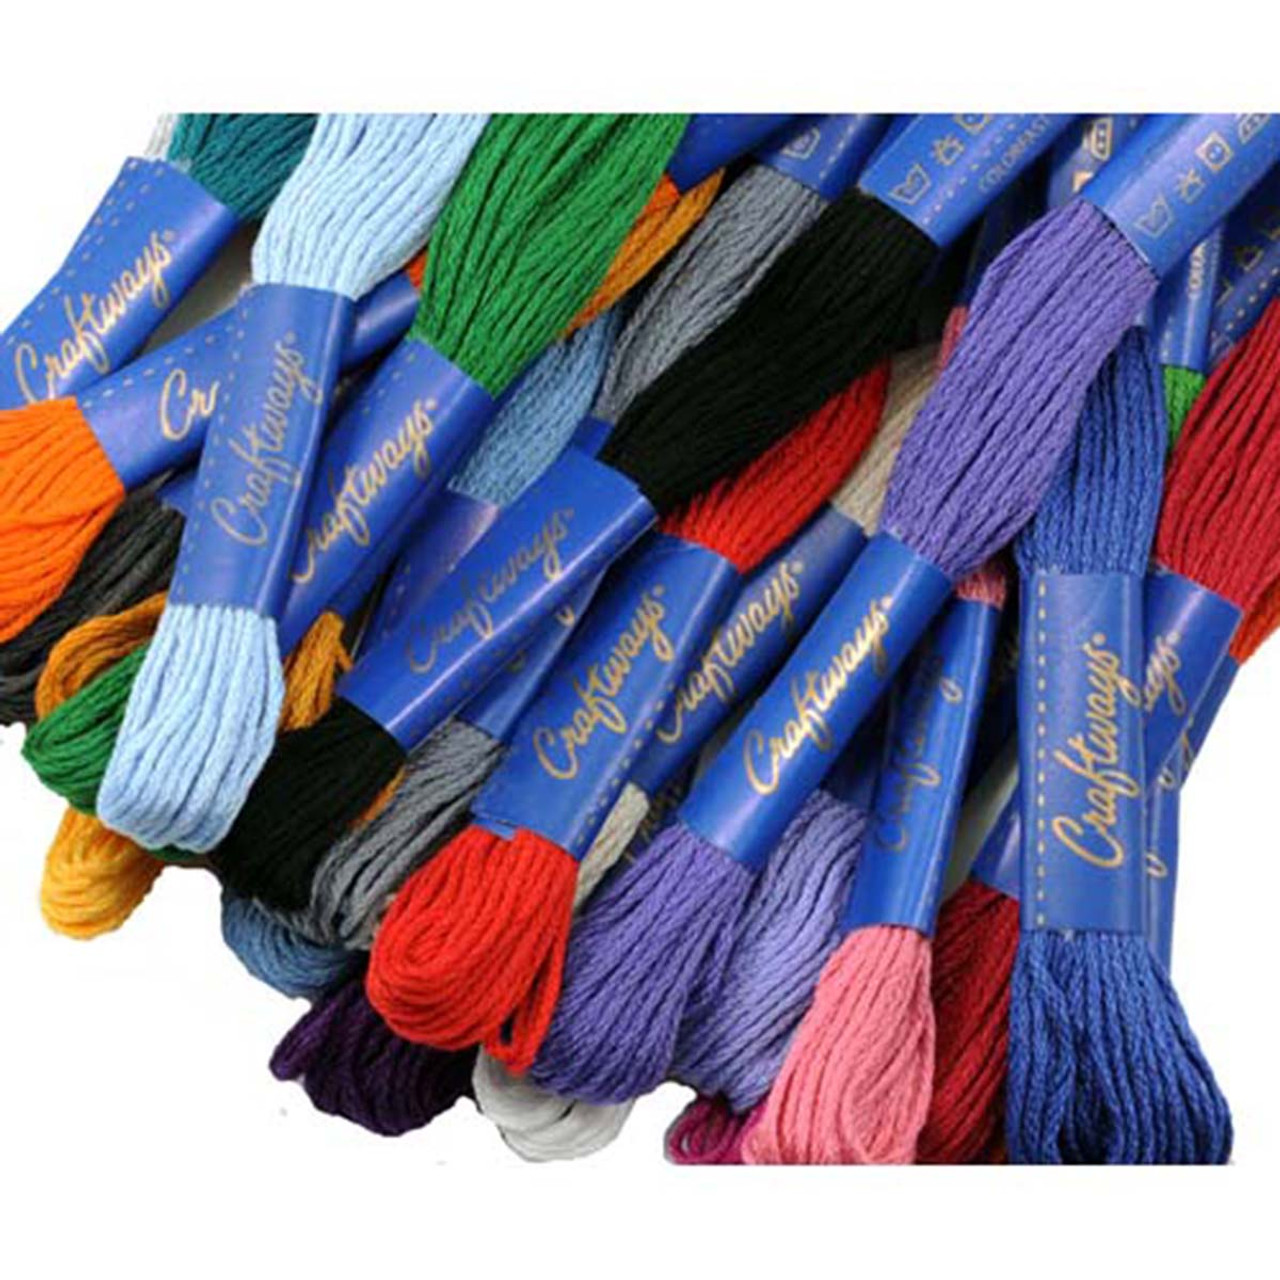 Craftways Embroidery Floss